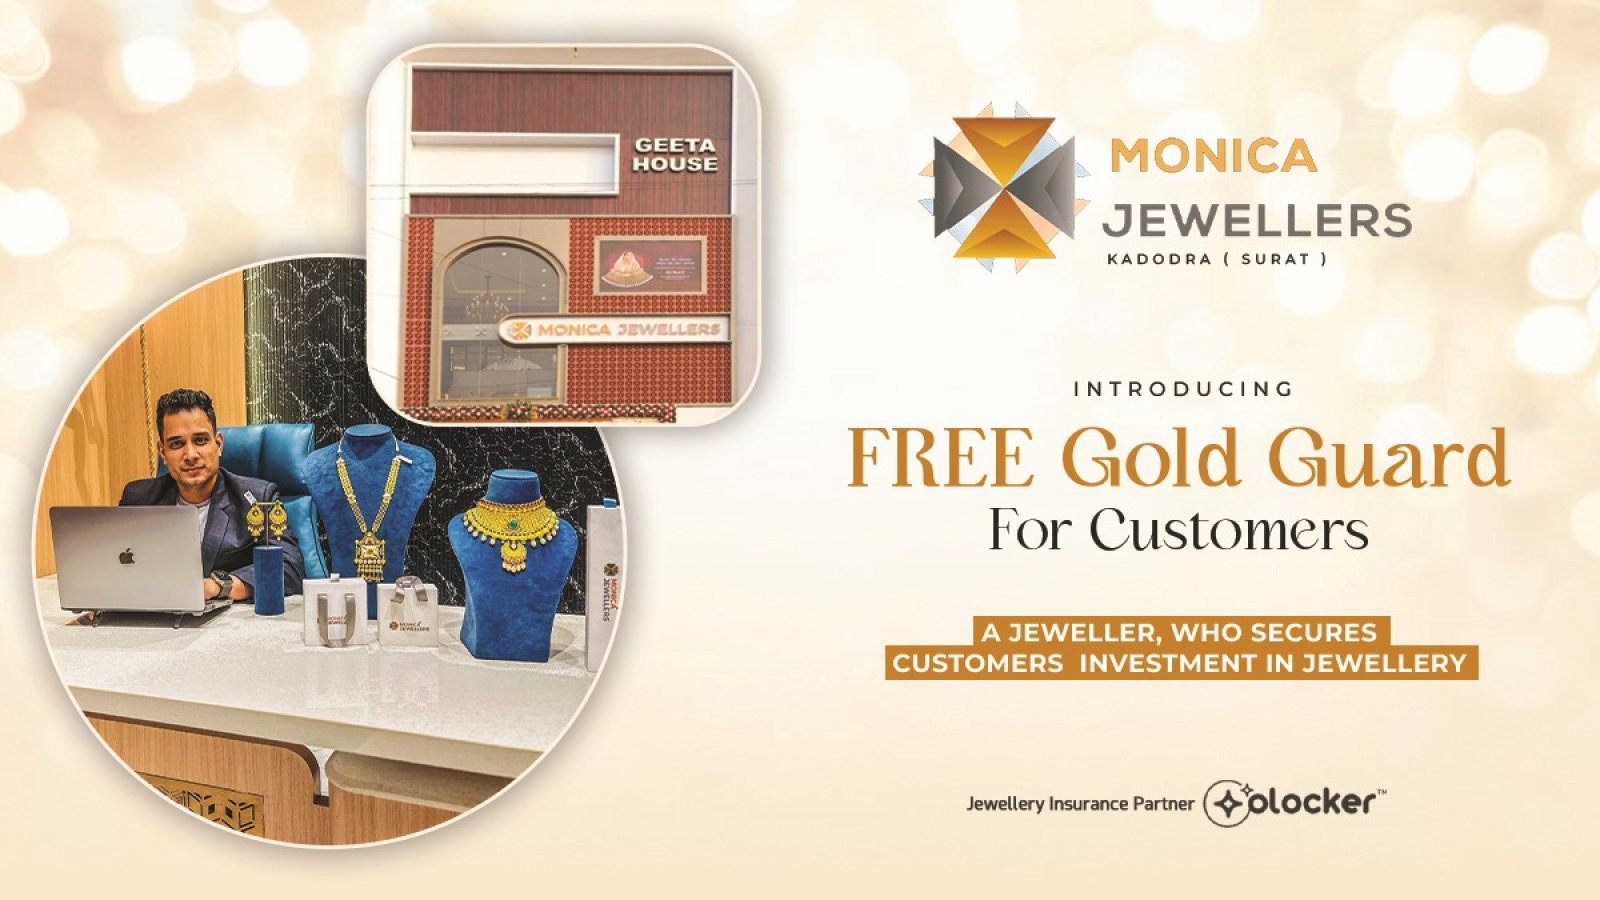 'Monica Jewellers partners OLocker and Introduces ‘Gold Guard’ Program: FREE JEWELLERY INSURANCE for Customer’s!'